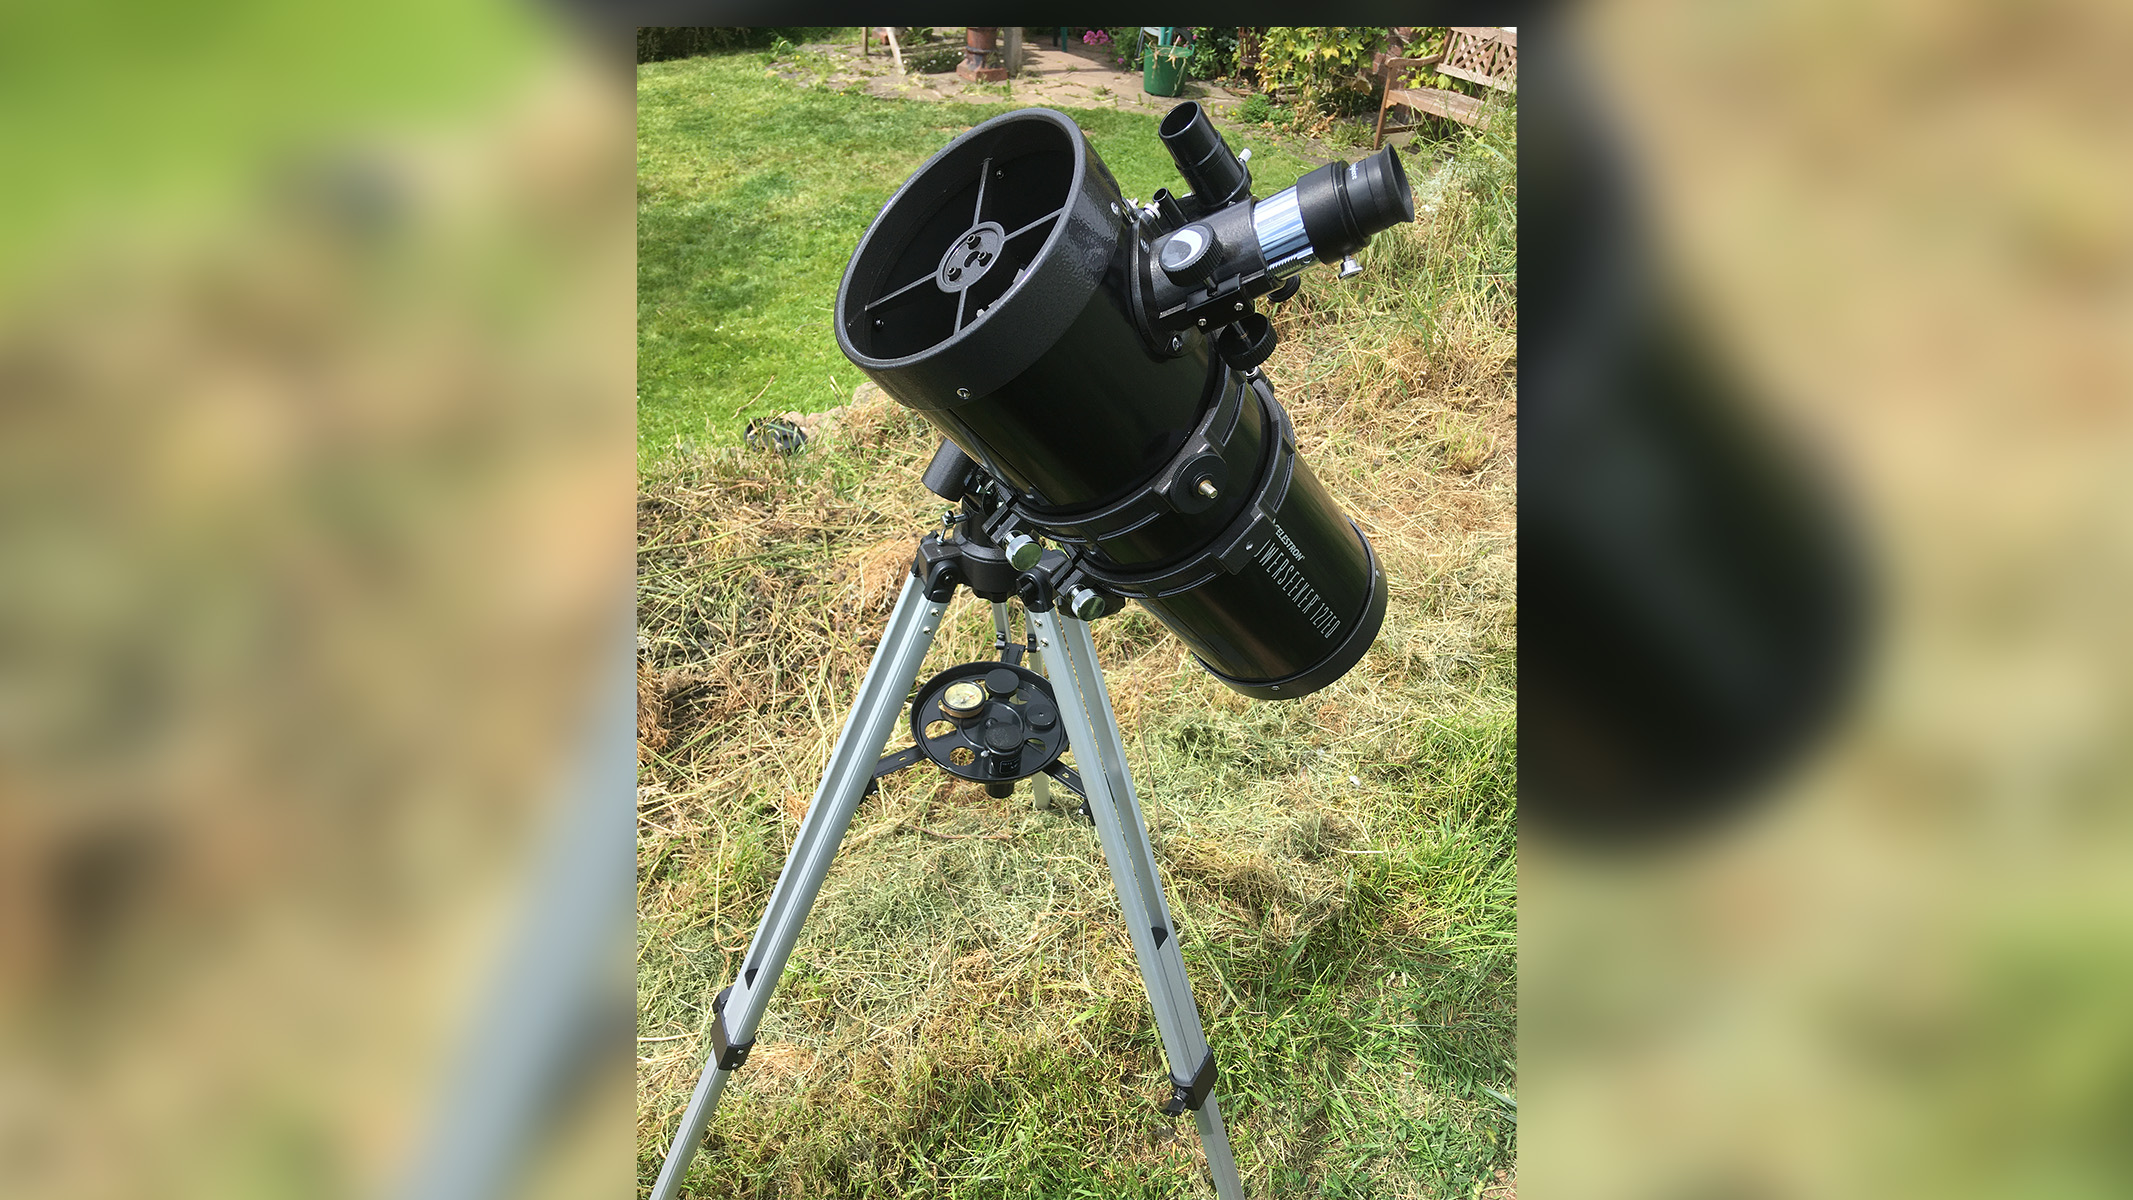 The Celestron PowerSeeker 127EQ and its tripod set up on the grass